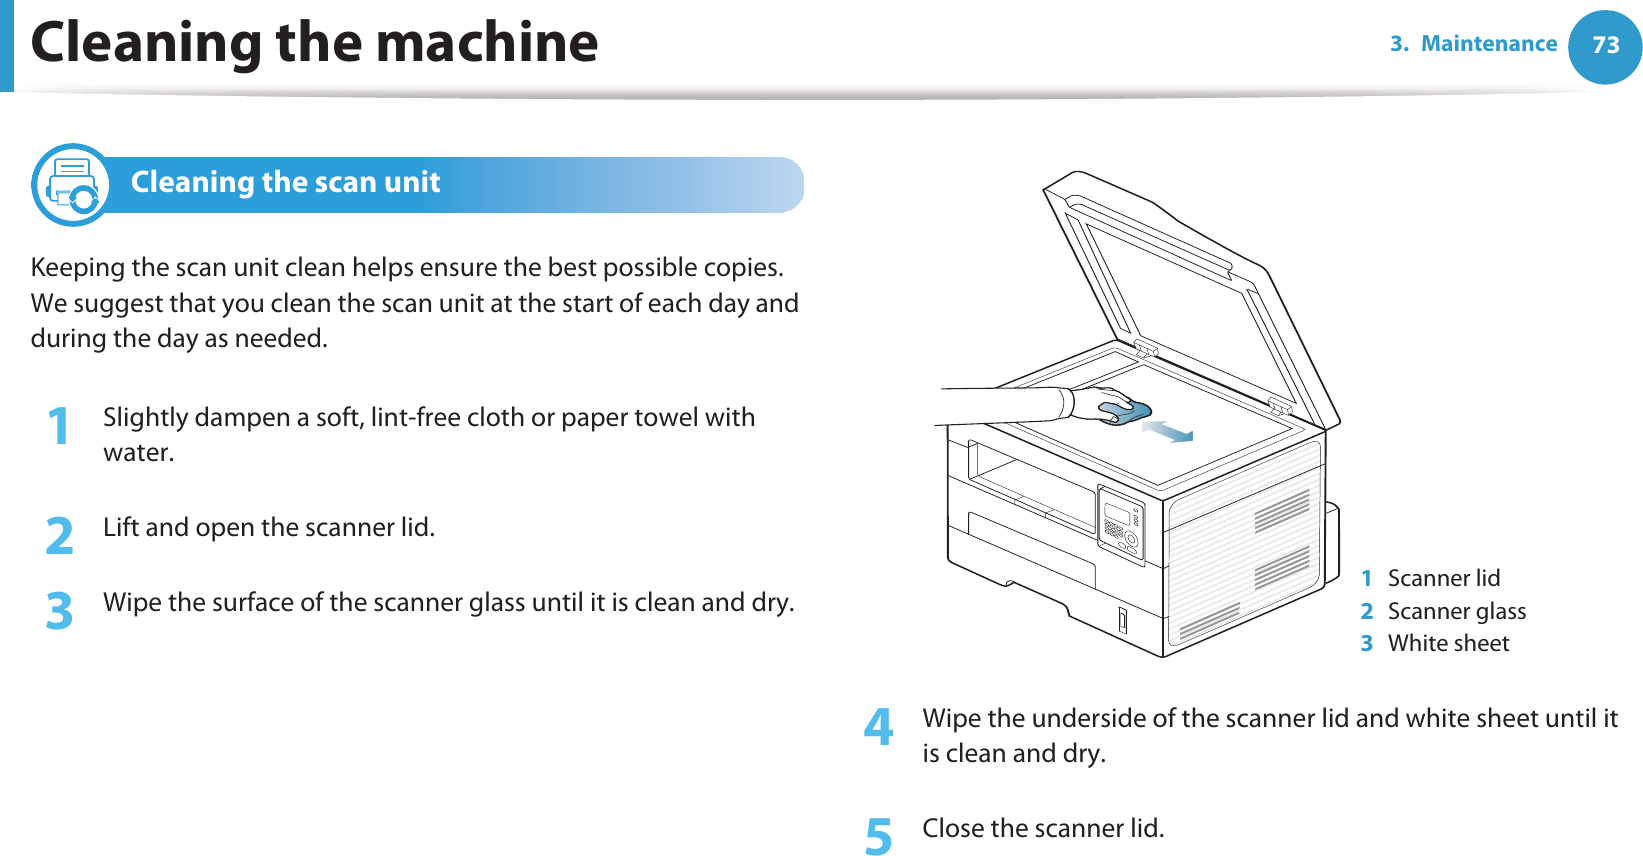 Cleaning the machine 733. Maintenance4 Cleaning the scan unitKeeping the scan unit clean helps ensure the best possible copies. We suggest that you clean the scan unit at the start of each day and during the day as needed.1Slightly dampen a soft, lint-free cloth or paper towel with water.2  Lift and open the scanner lid.3  Wipe the surface of the scanner glass until it is clean and dry.4  Wipe the underside of the scanner lid and white sheet until it is clean and dry.5  Close the scanner lid.1Scanner lid2Scanner glass3White sheet